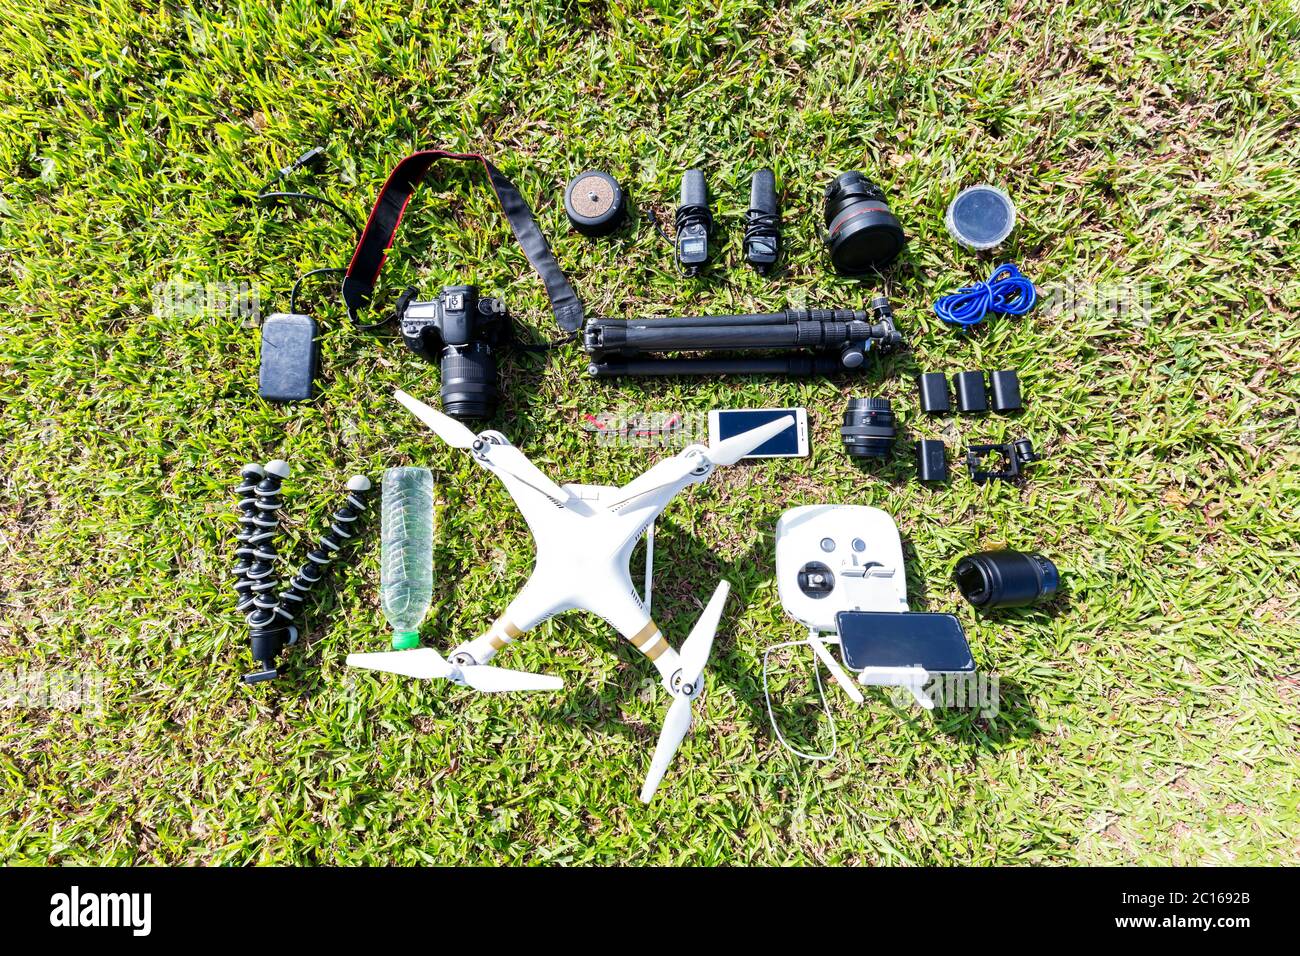 drone with photography equipment on grass Stock Photo